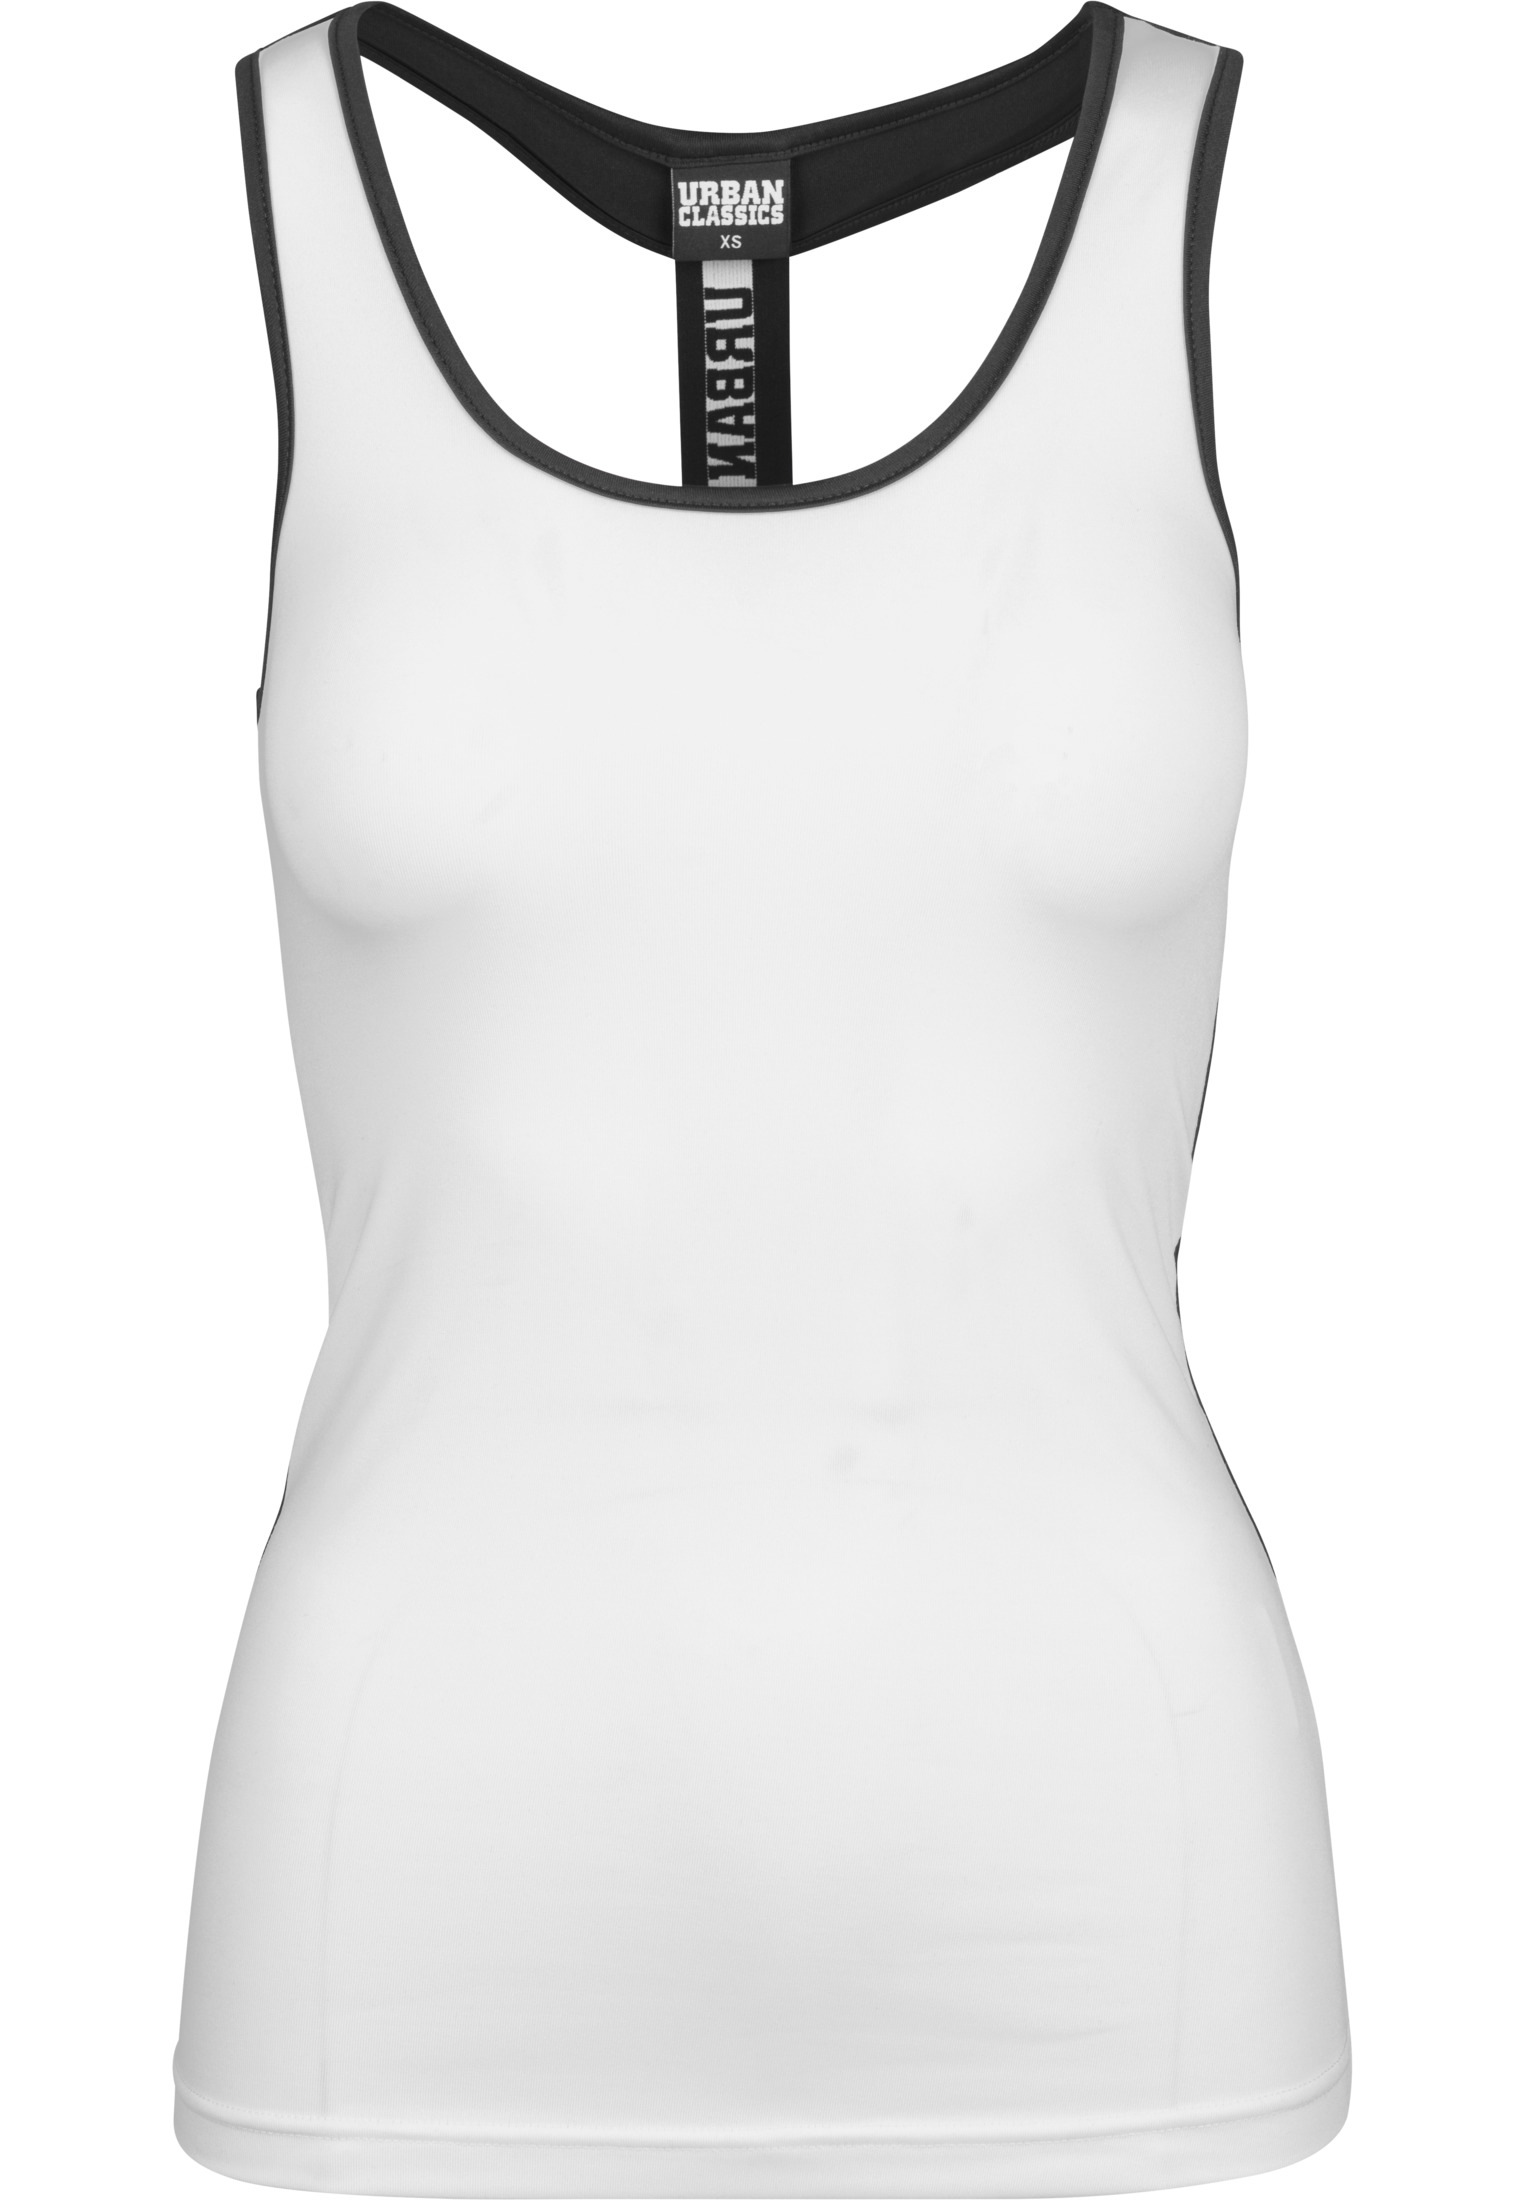 Athleisure Ladies Sports Top in Farbe wht/blk